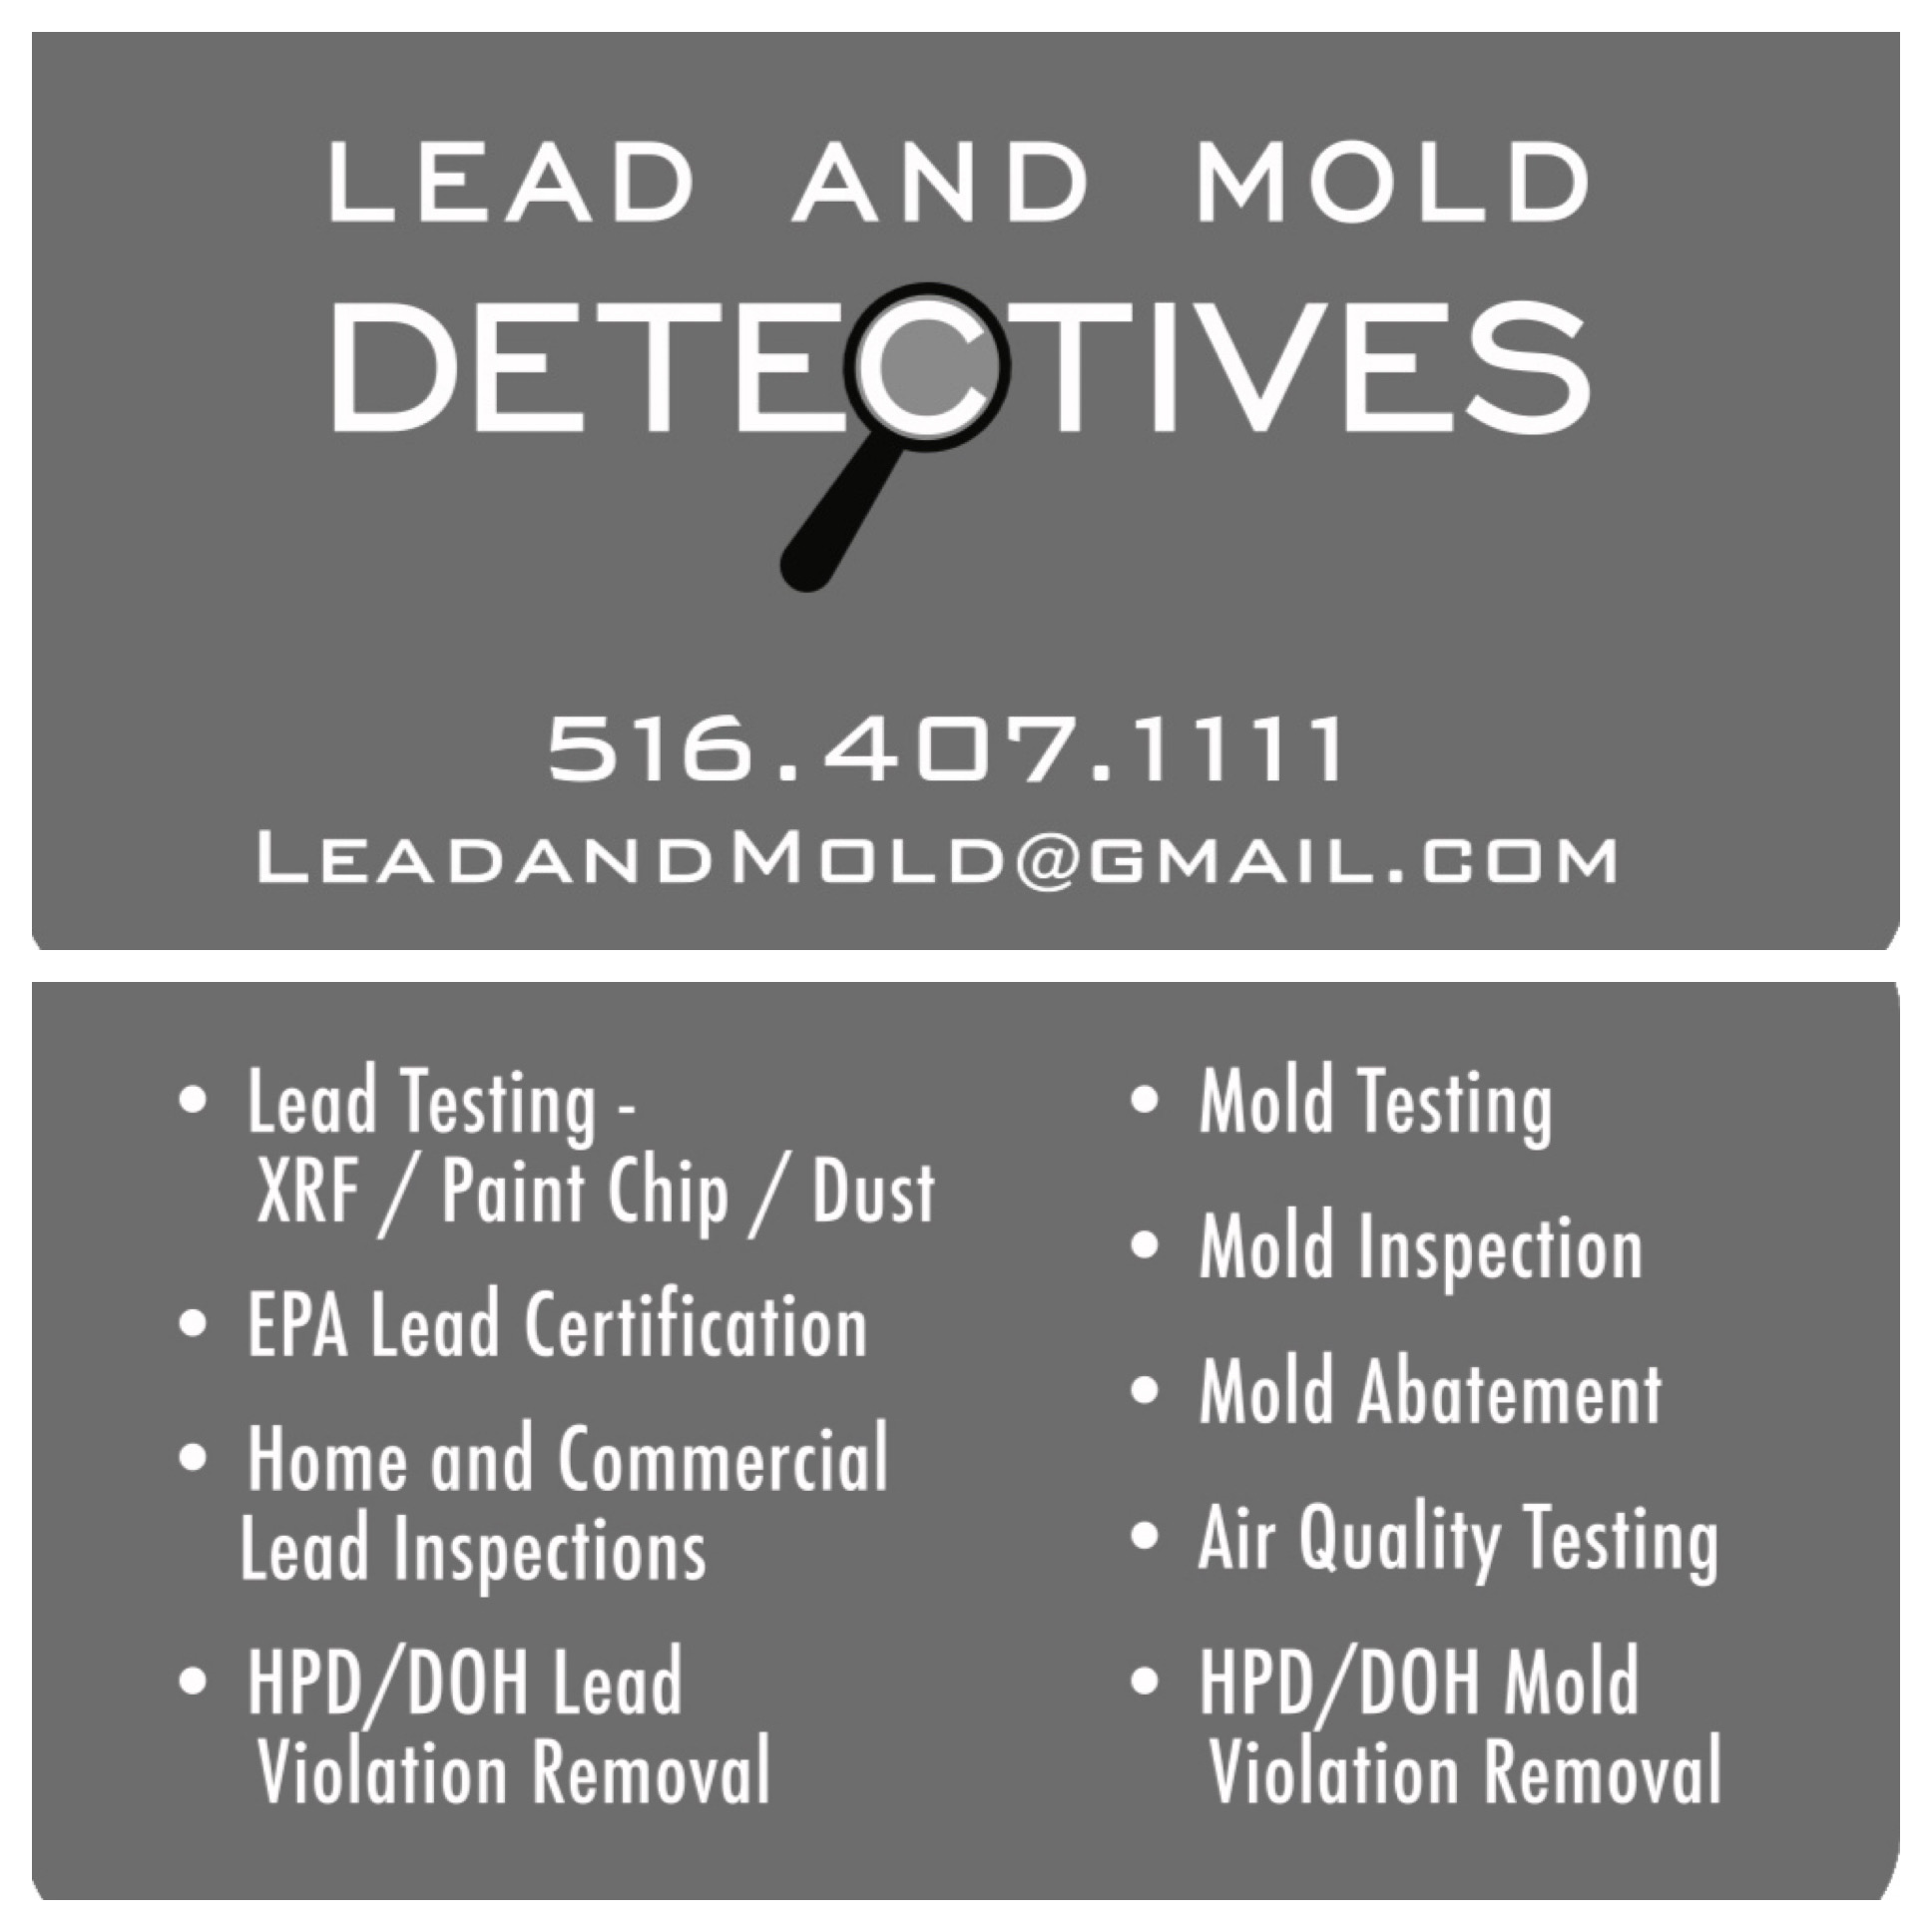 Lead and Mold Detectives Logo